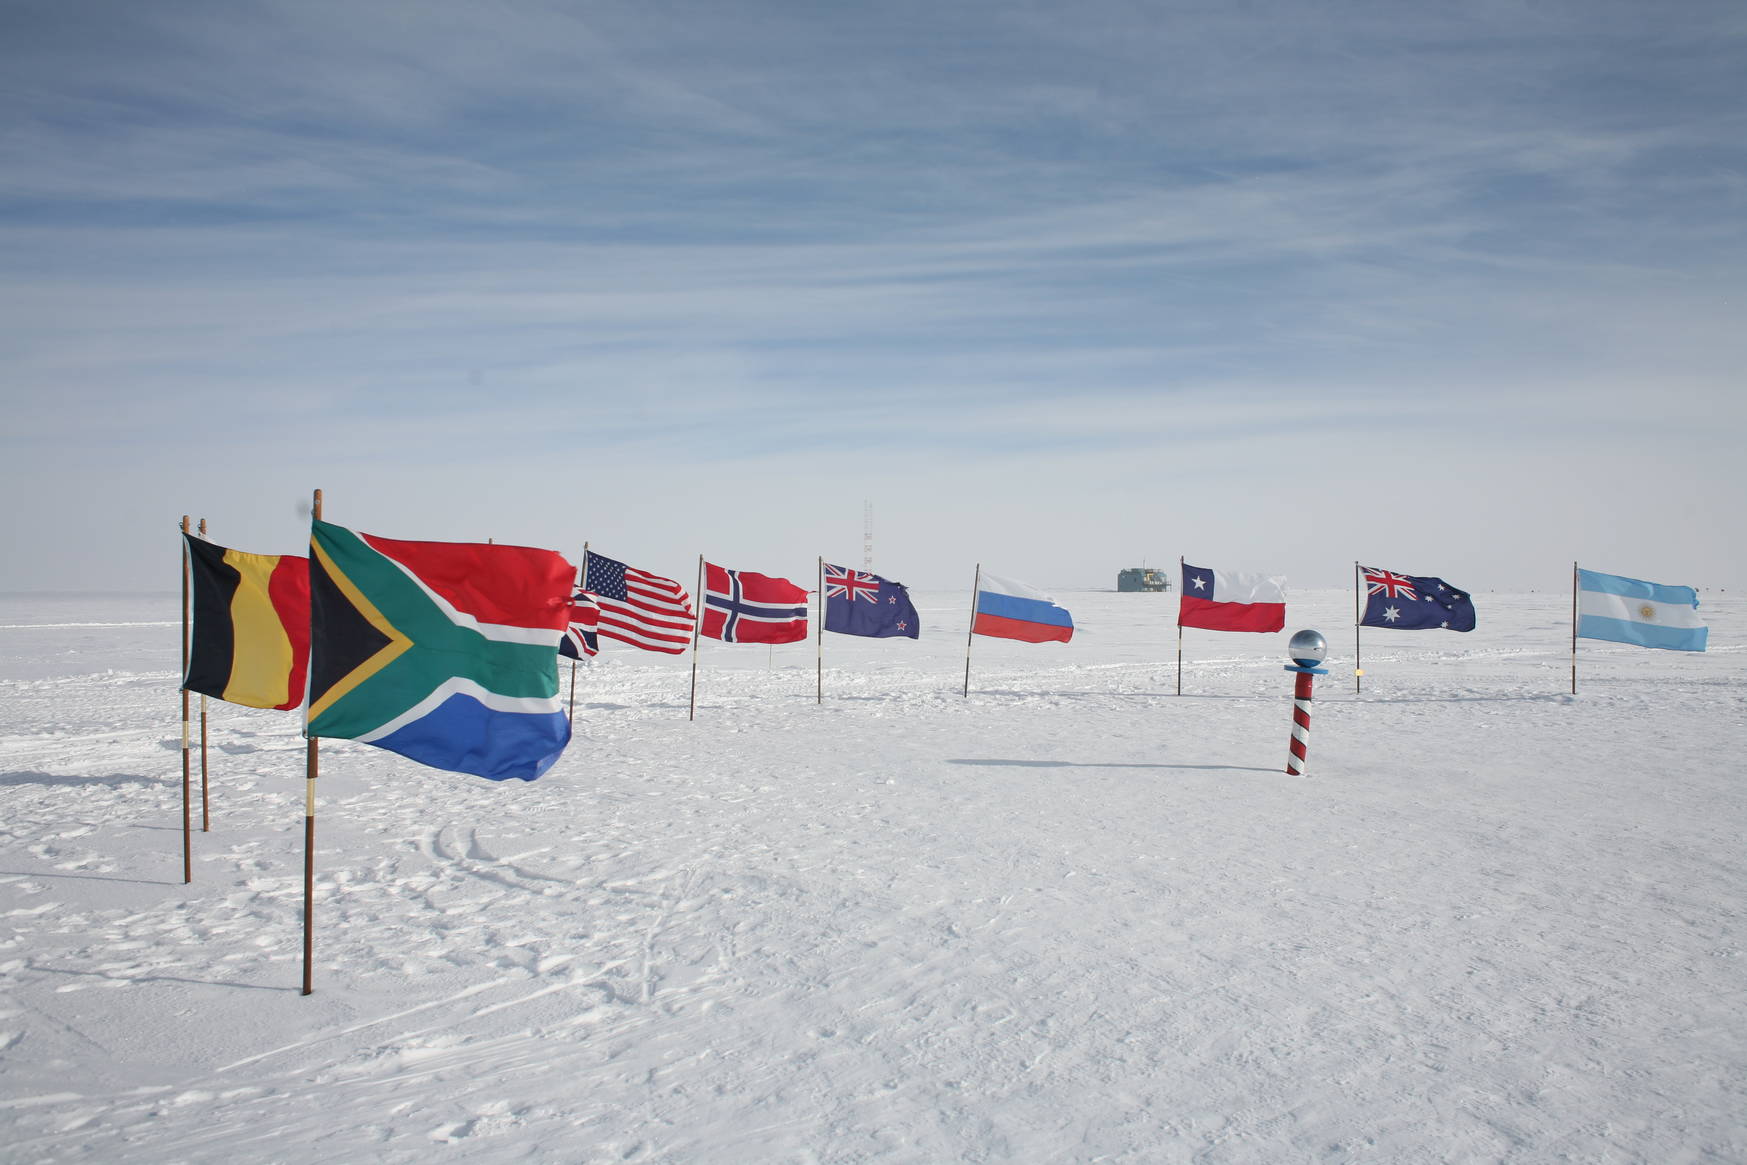 Fun with flags: the ceremonial south pole